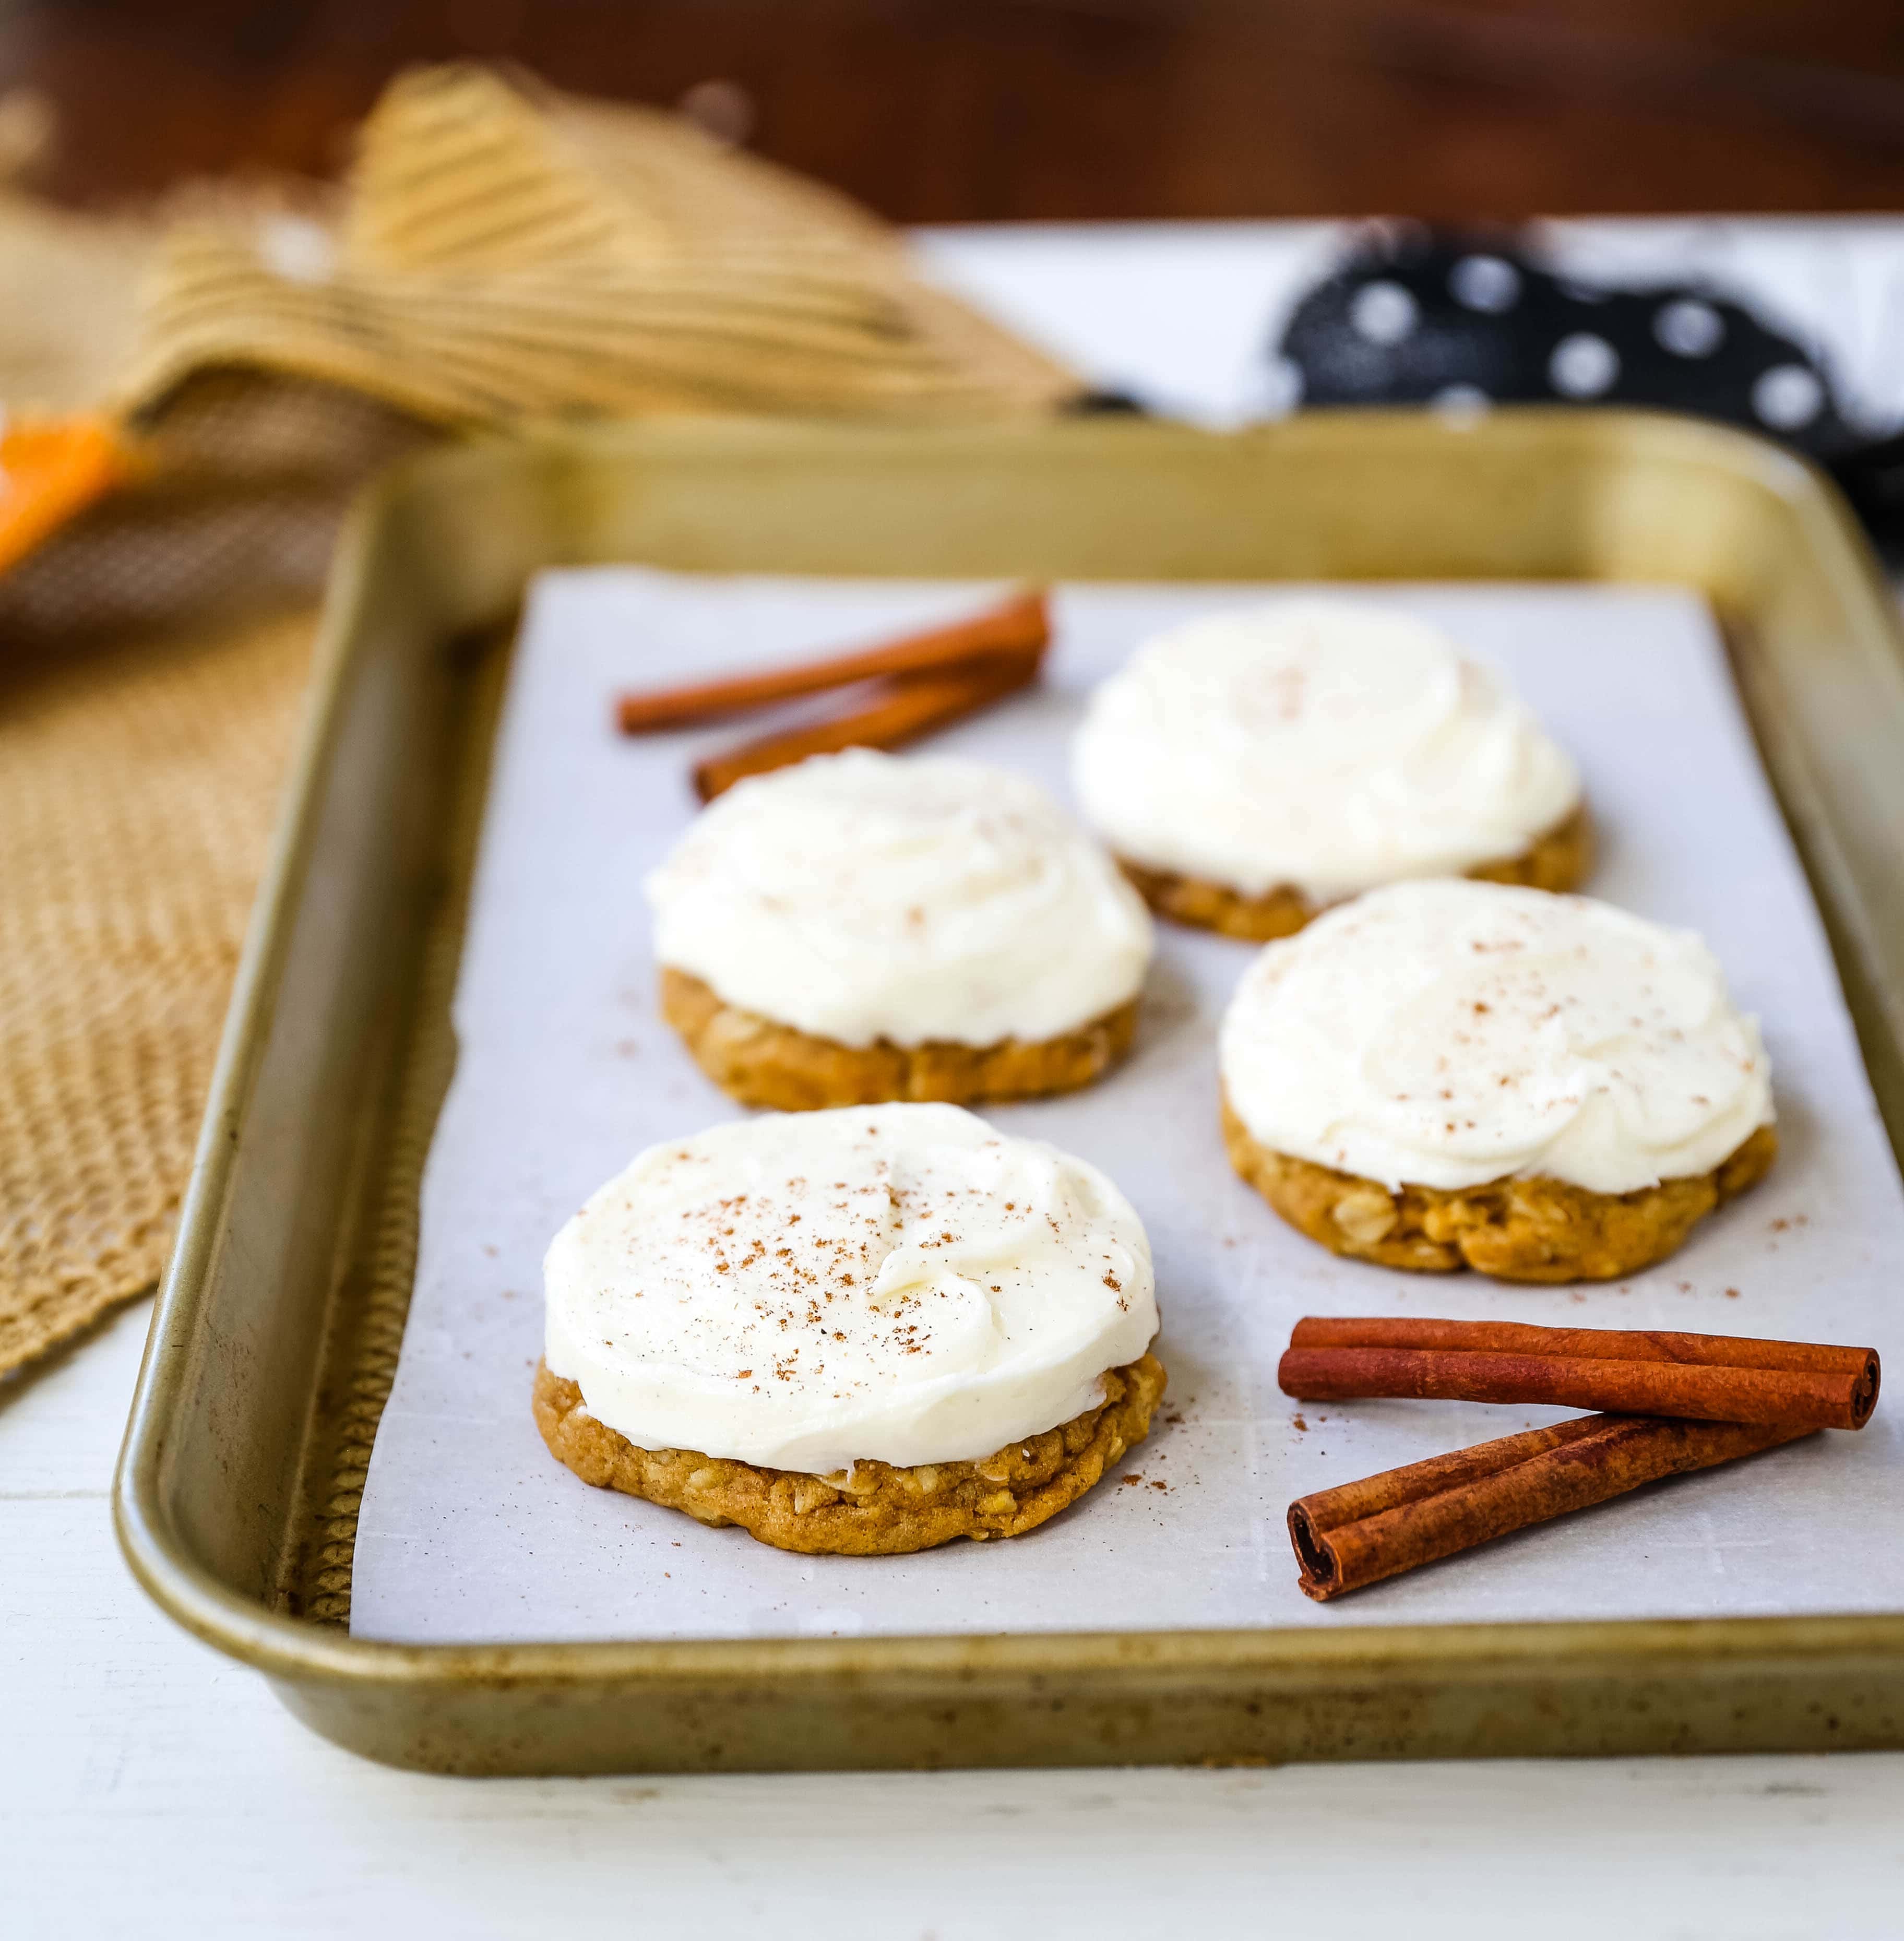 The BEST PUMPKIN COOKIES with CREAM CHEESE FROSTING Soft chewy pumpkin spiced cookies with a fluffy sweet cream cheese frosting. The perfect frosted pumpkin cookie recipe! www.modernhoney.com #pumpkin #pumpkincookies #frostedpumpkincookies #fall #fallrecipes